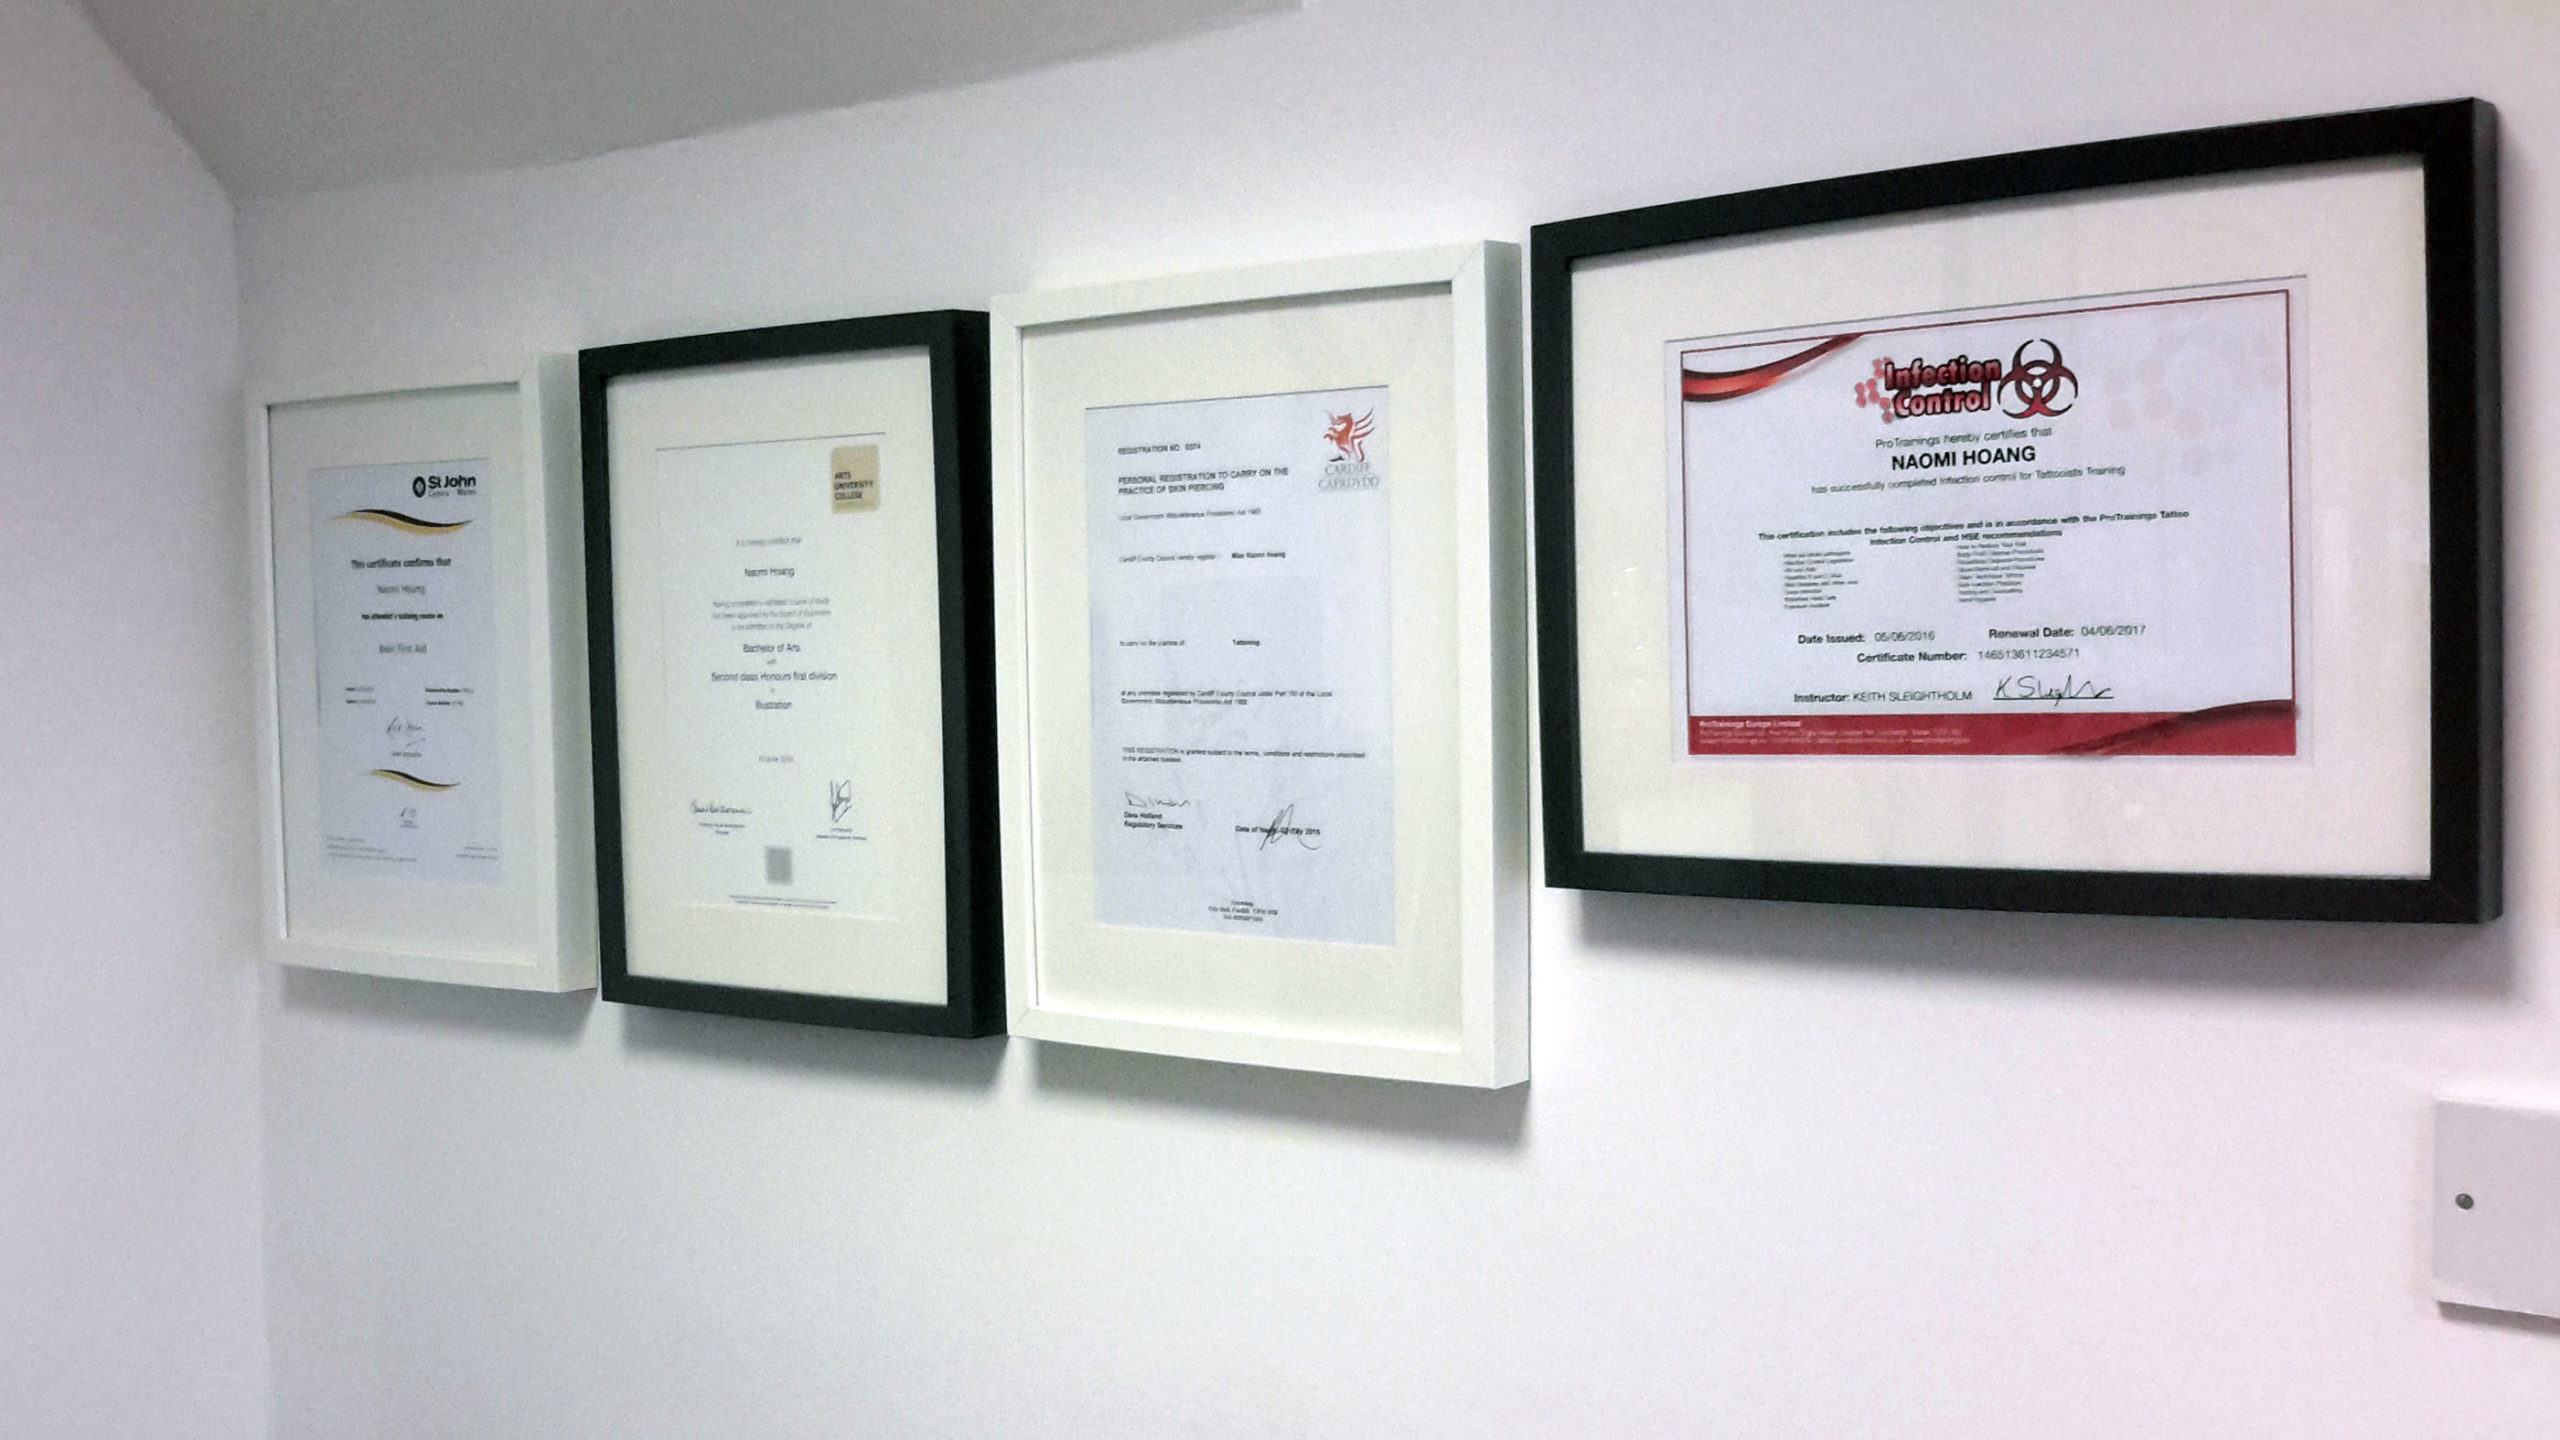 Certificates are clearly on display at NAOHOA Luxury Bespoke Tattoos, Cardiff, Wales (UK).